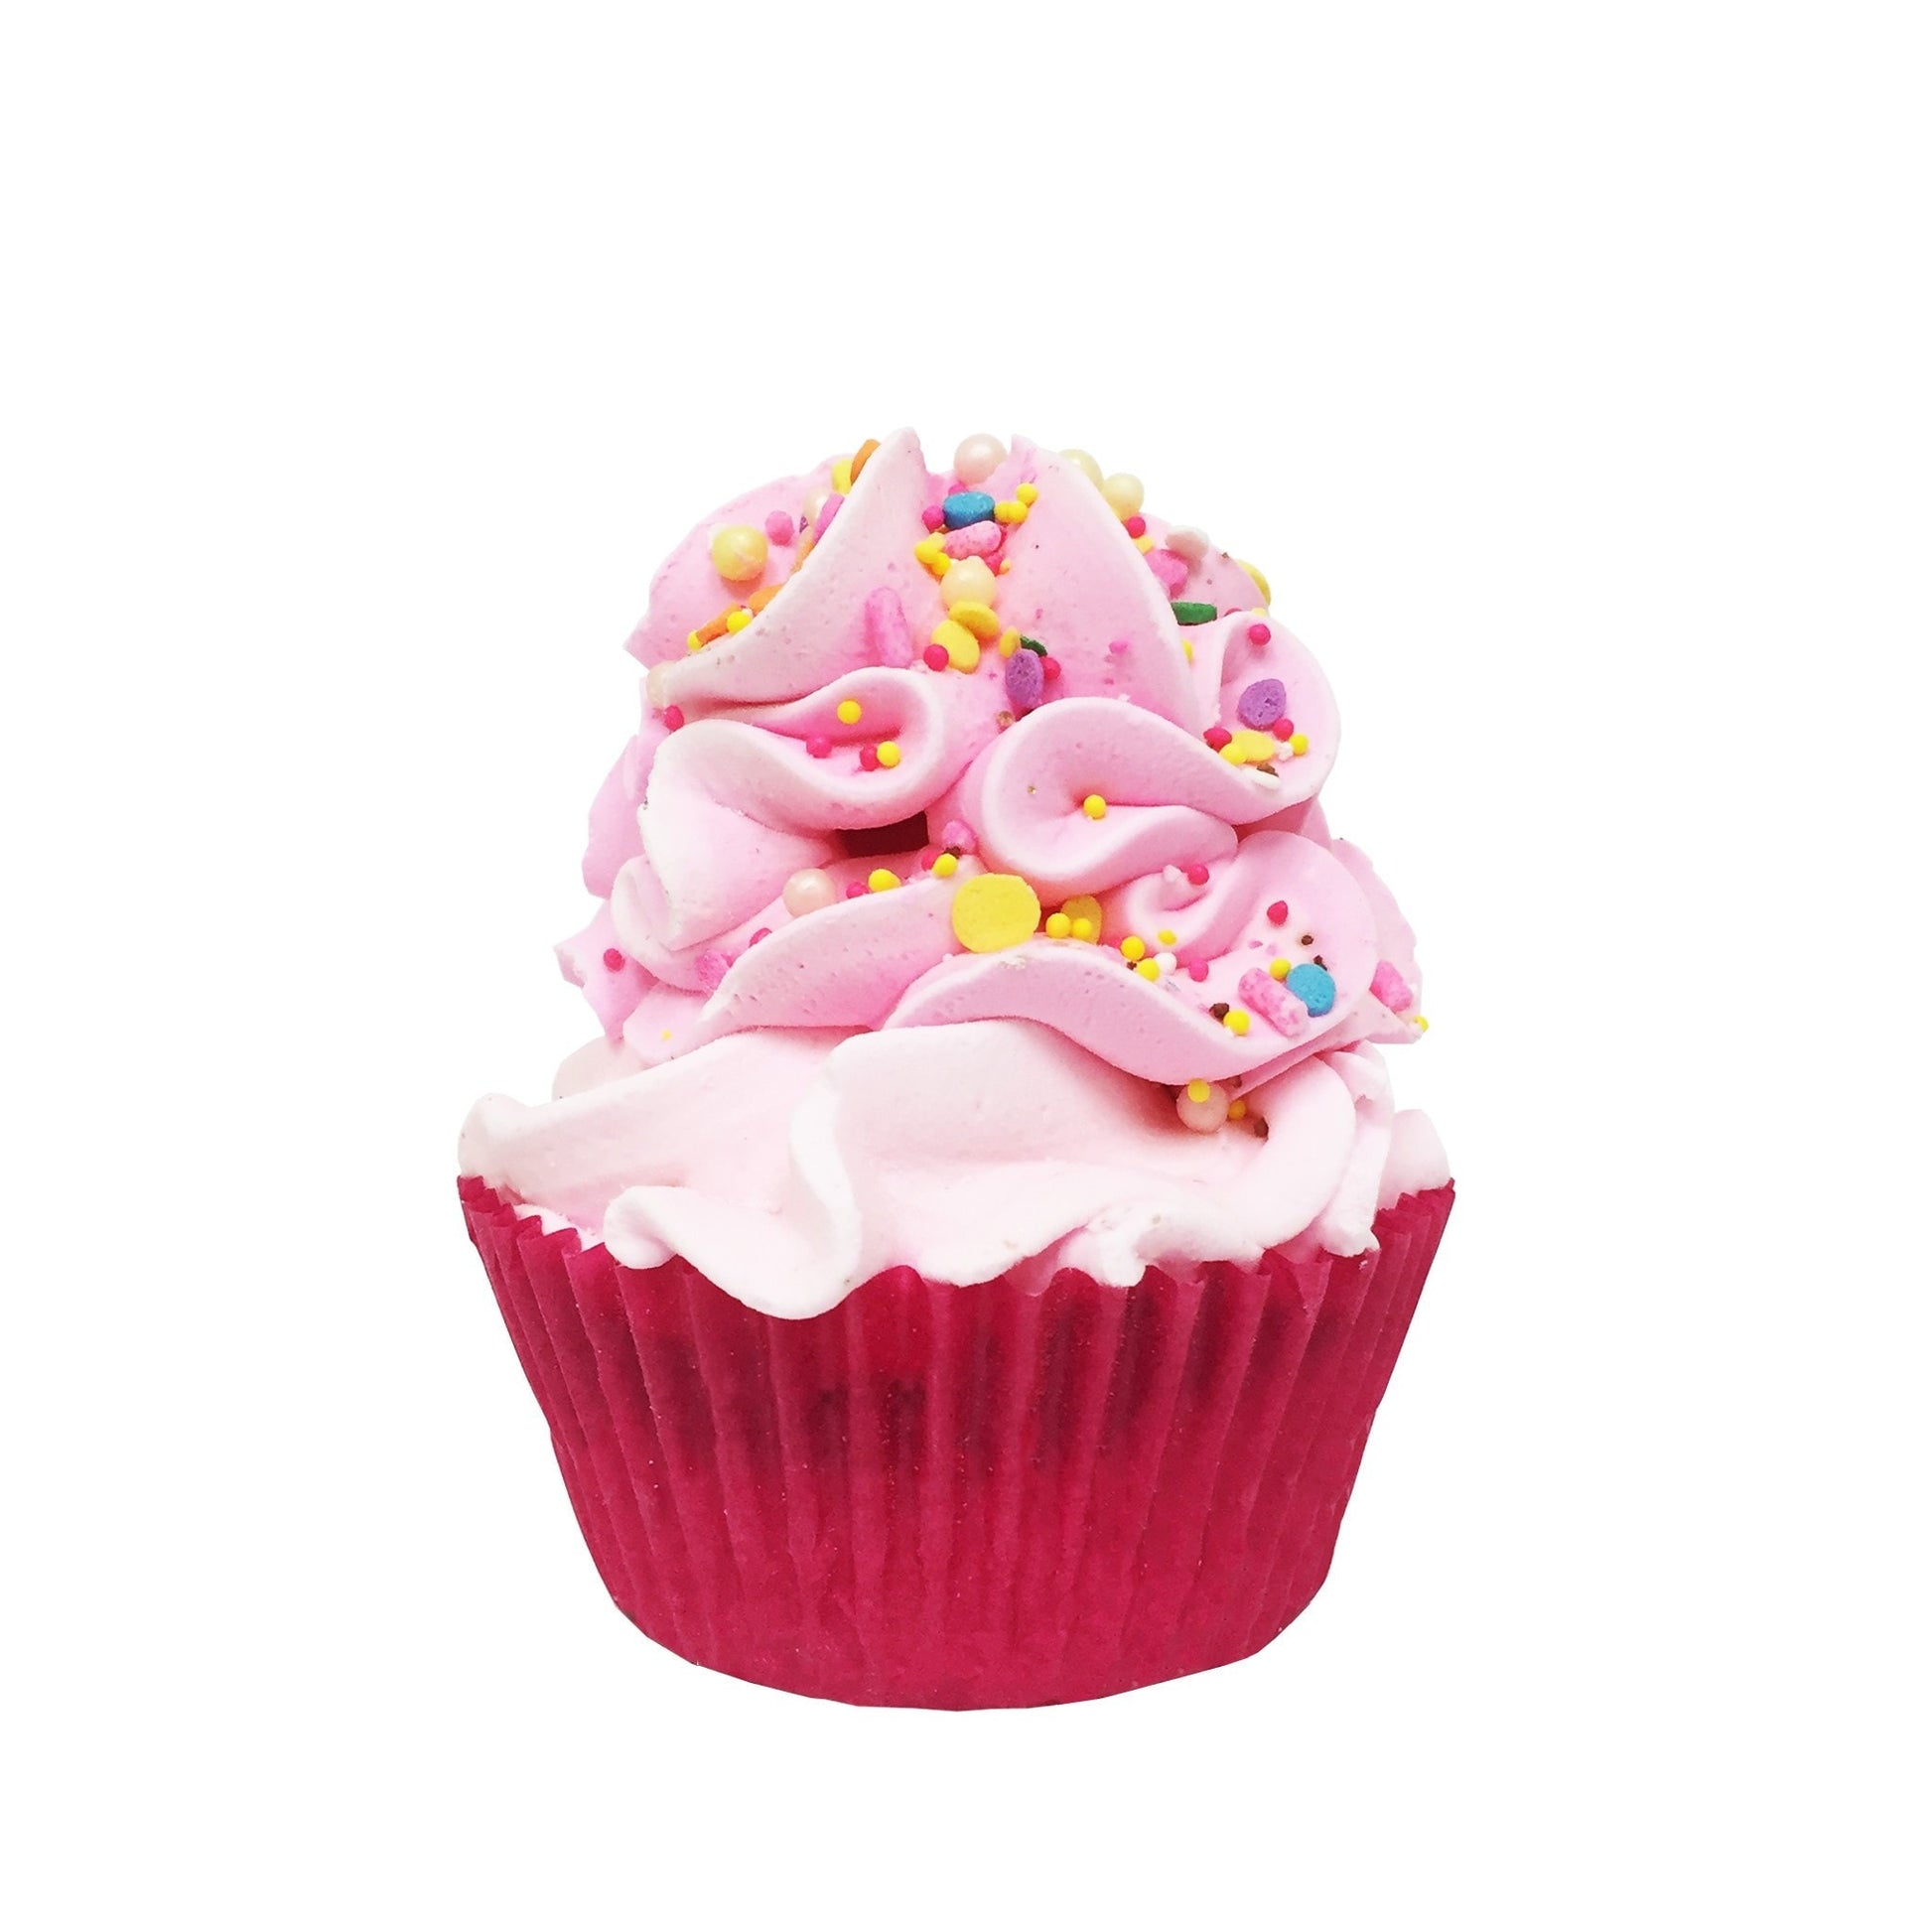 Pink Bliss Cupcake Bath Bombs Bath Salts Click to open in modal